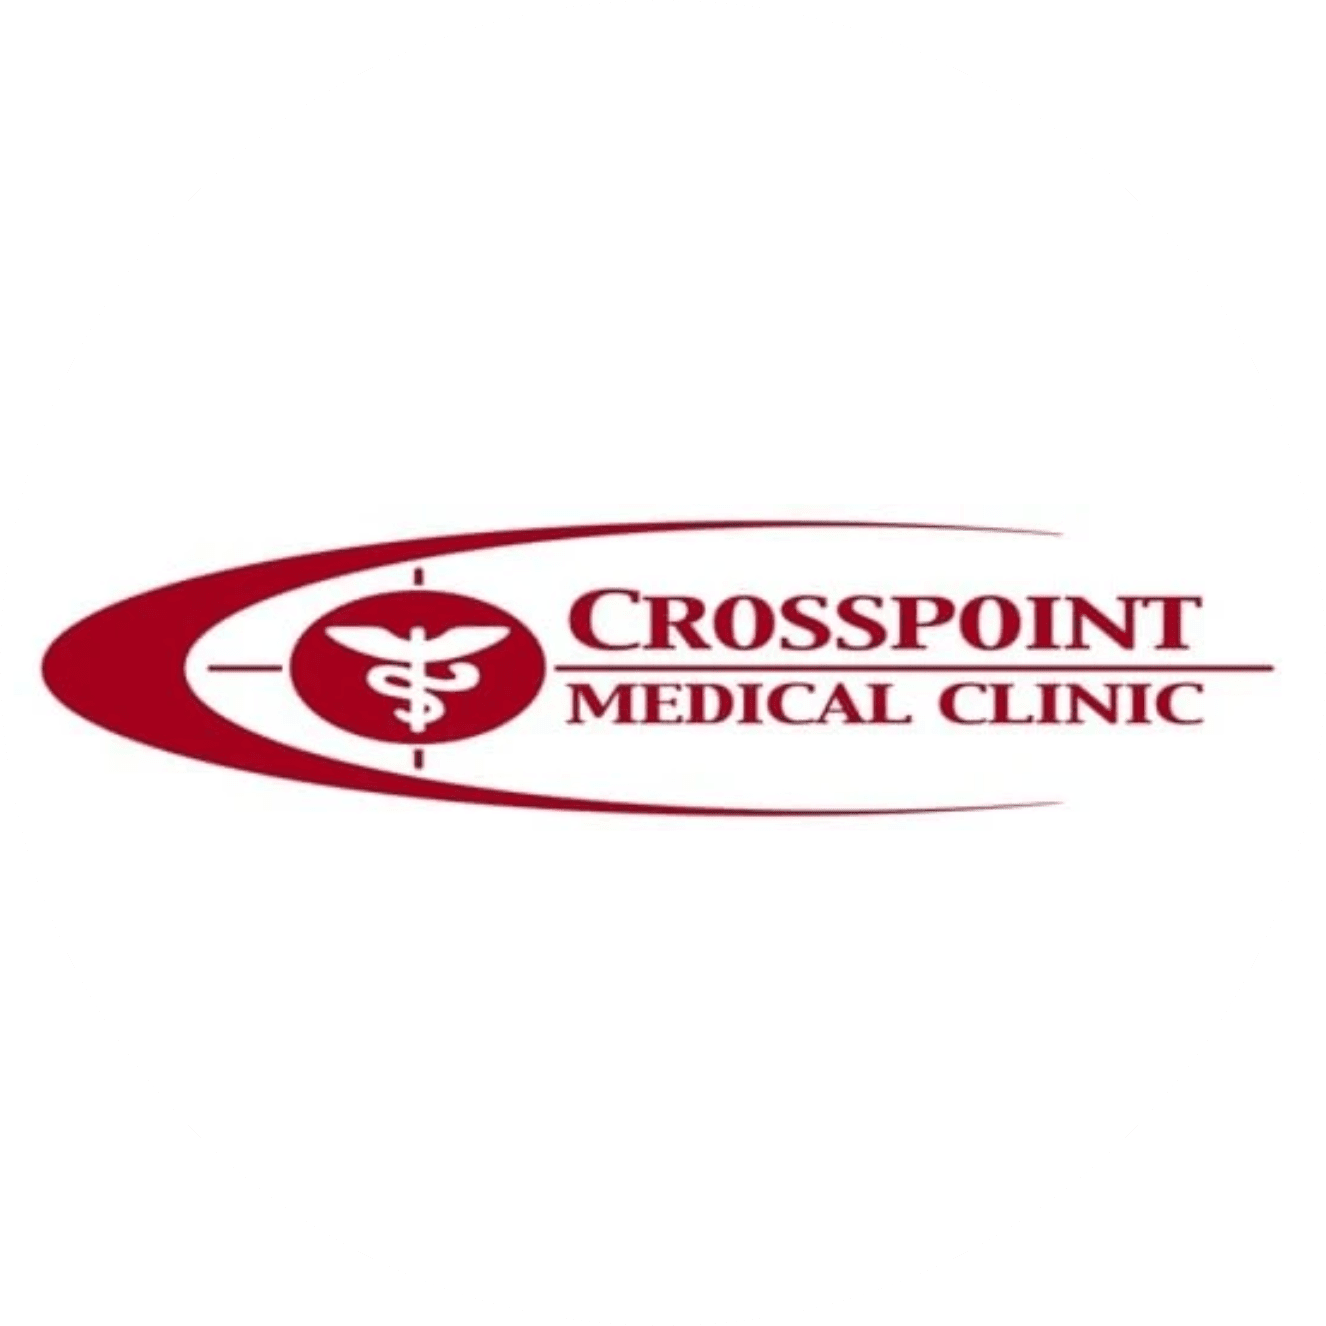 Crosspoint Medical Clinic